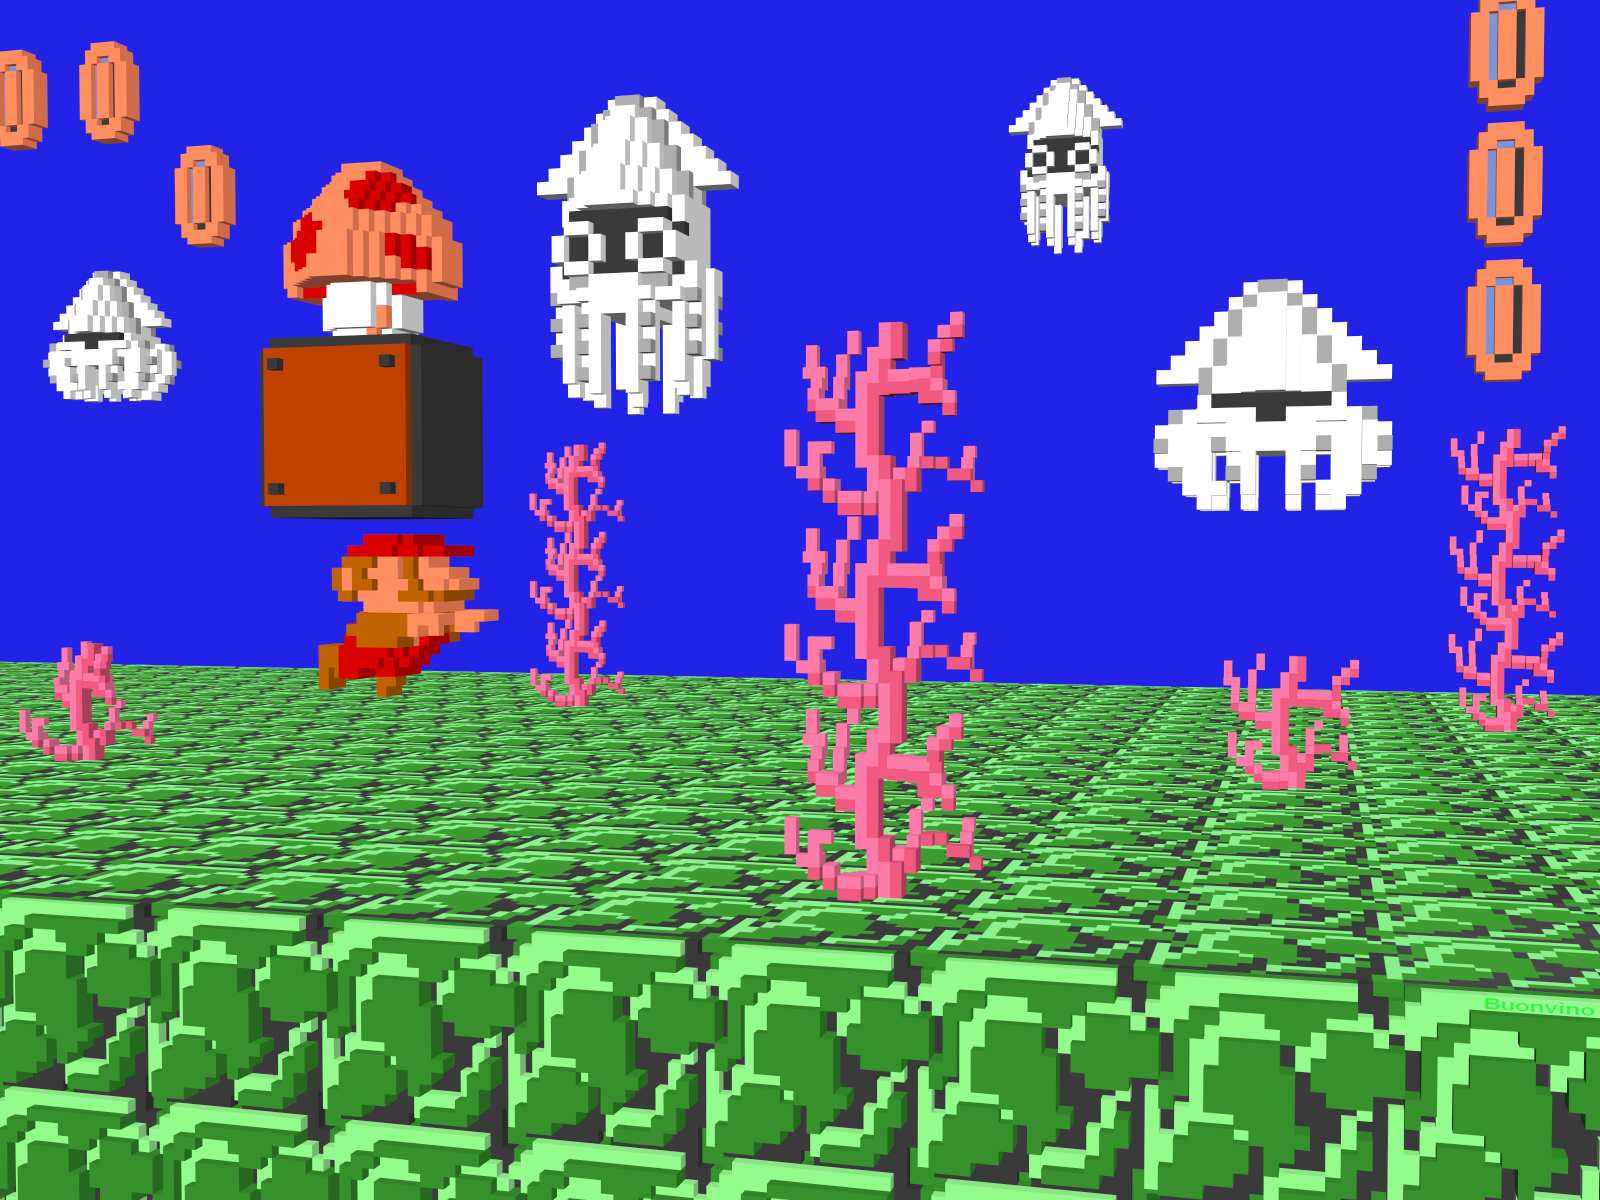 3_D_Mario_Scene___Bloopers_by_NES__still_the_best.png